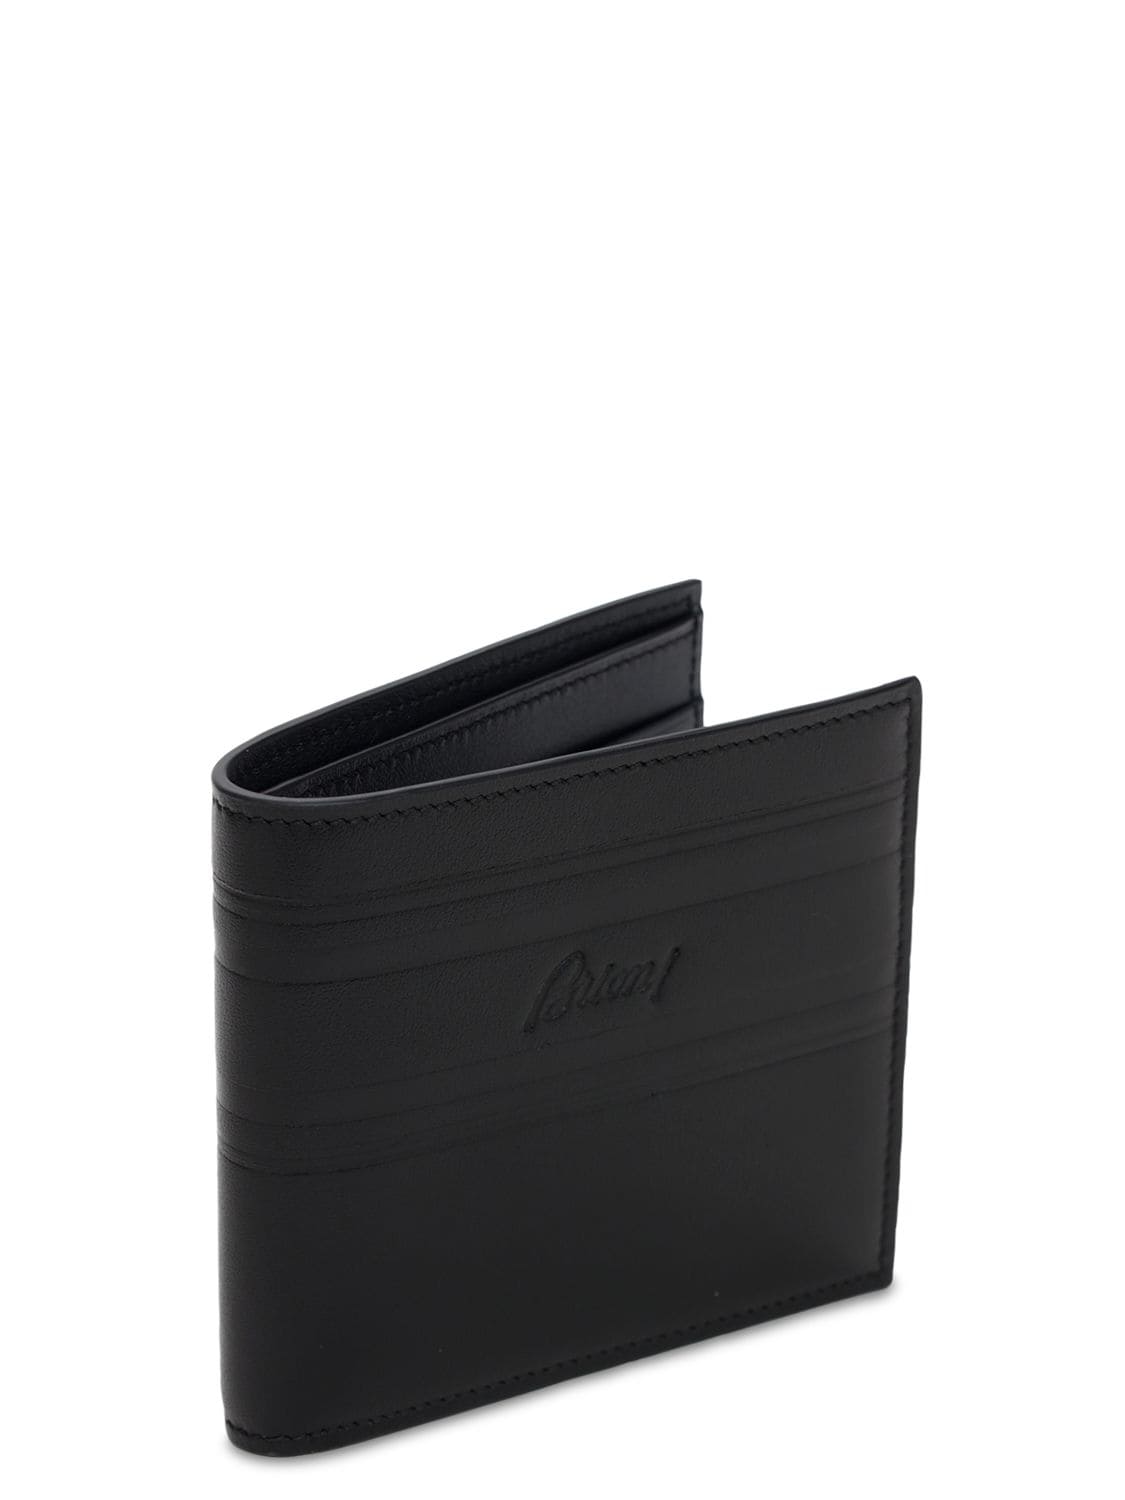 BRIONI Wallets CLASSIC LEATHER WALLET